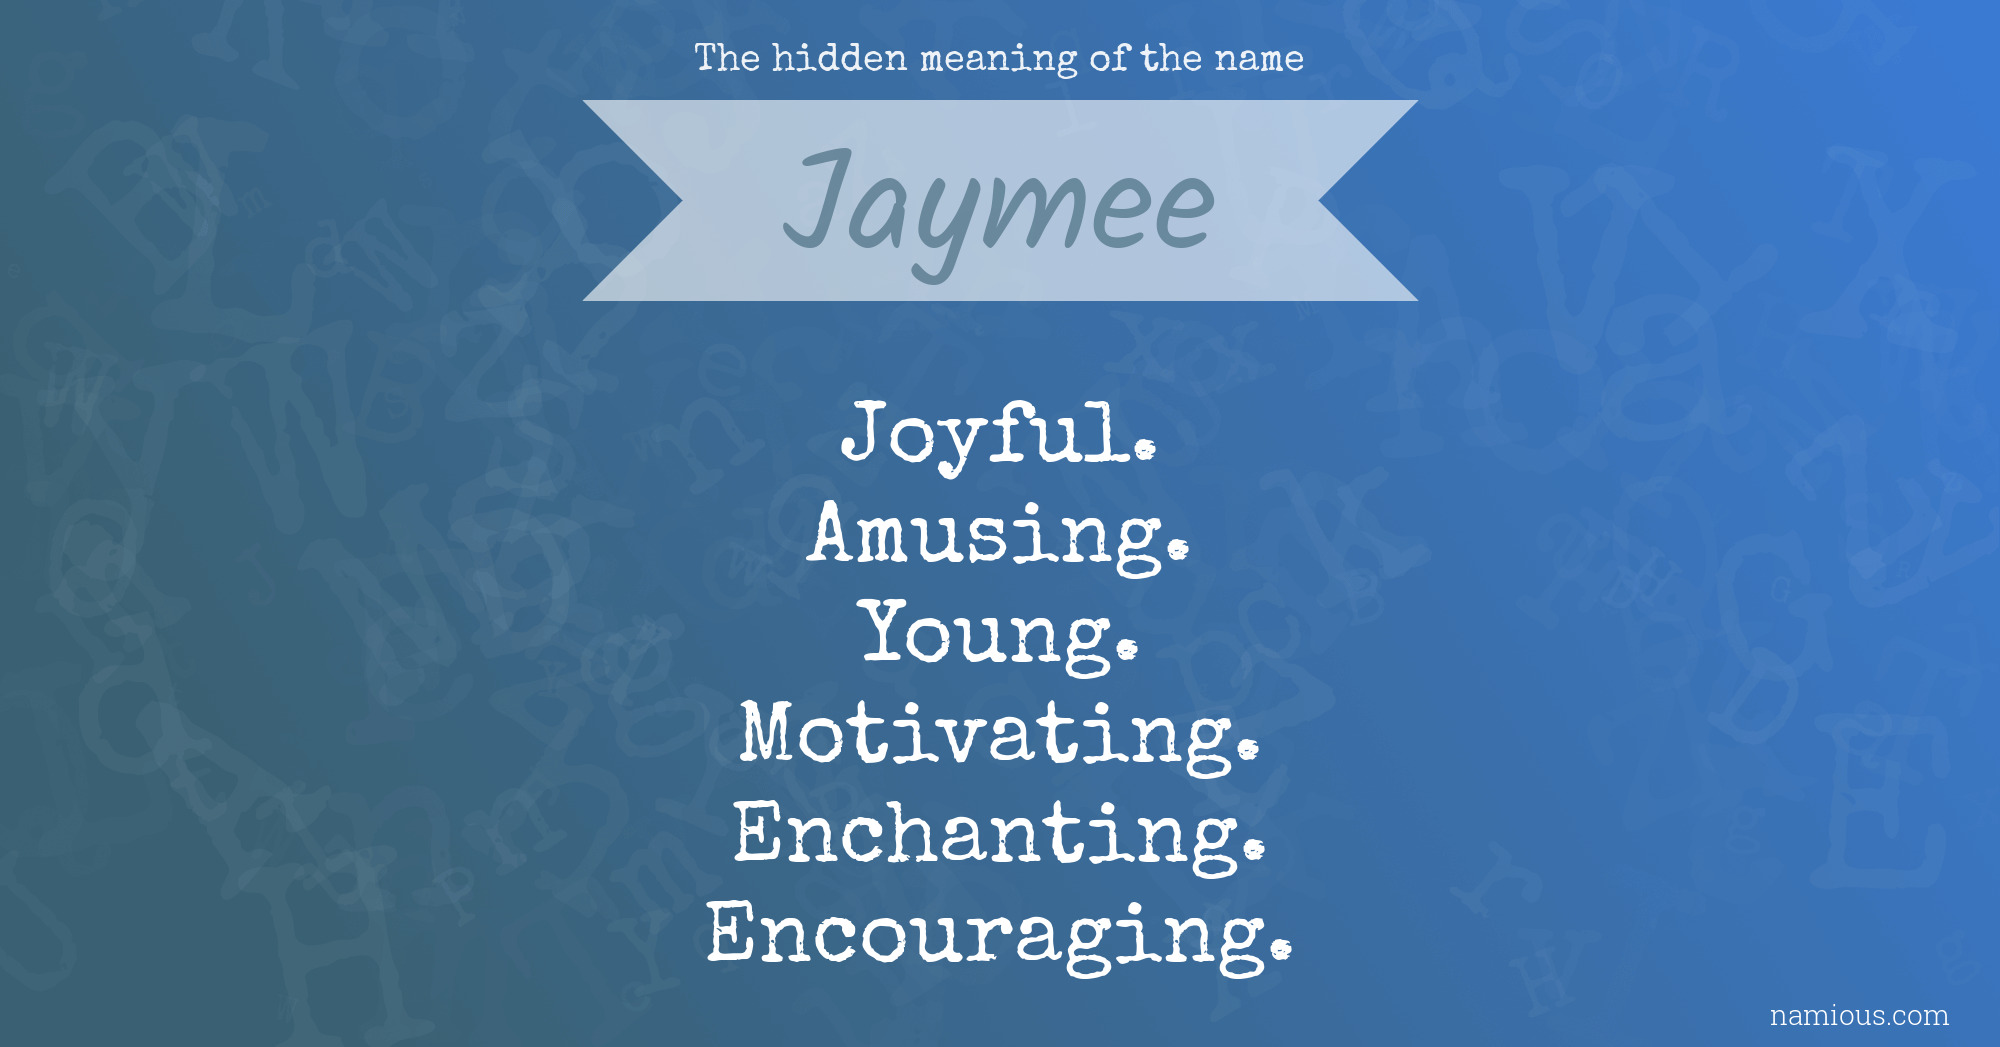 The hidden meaning of the name Jaymee